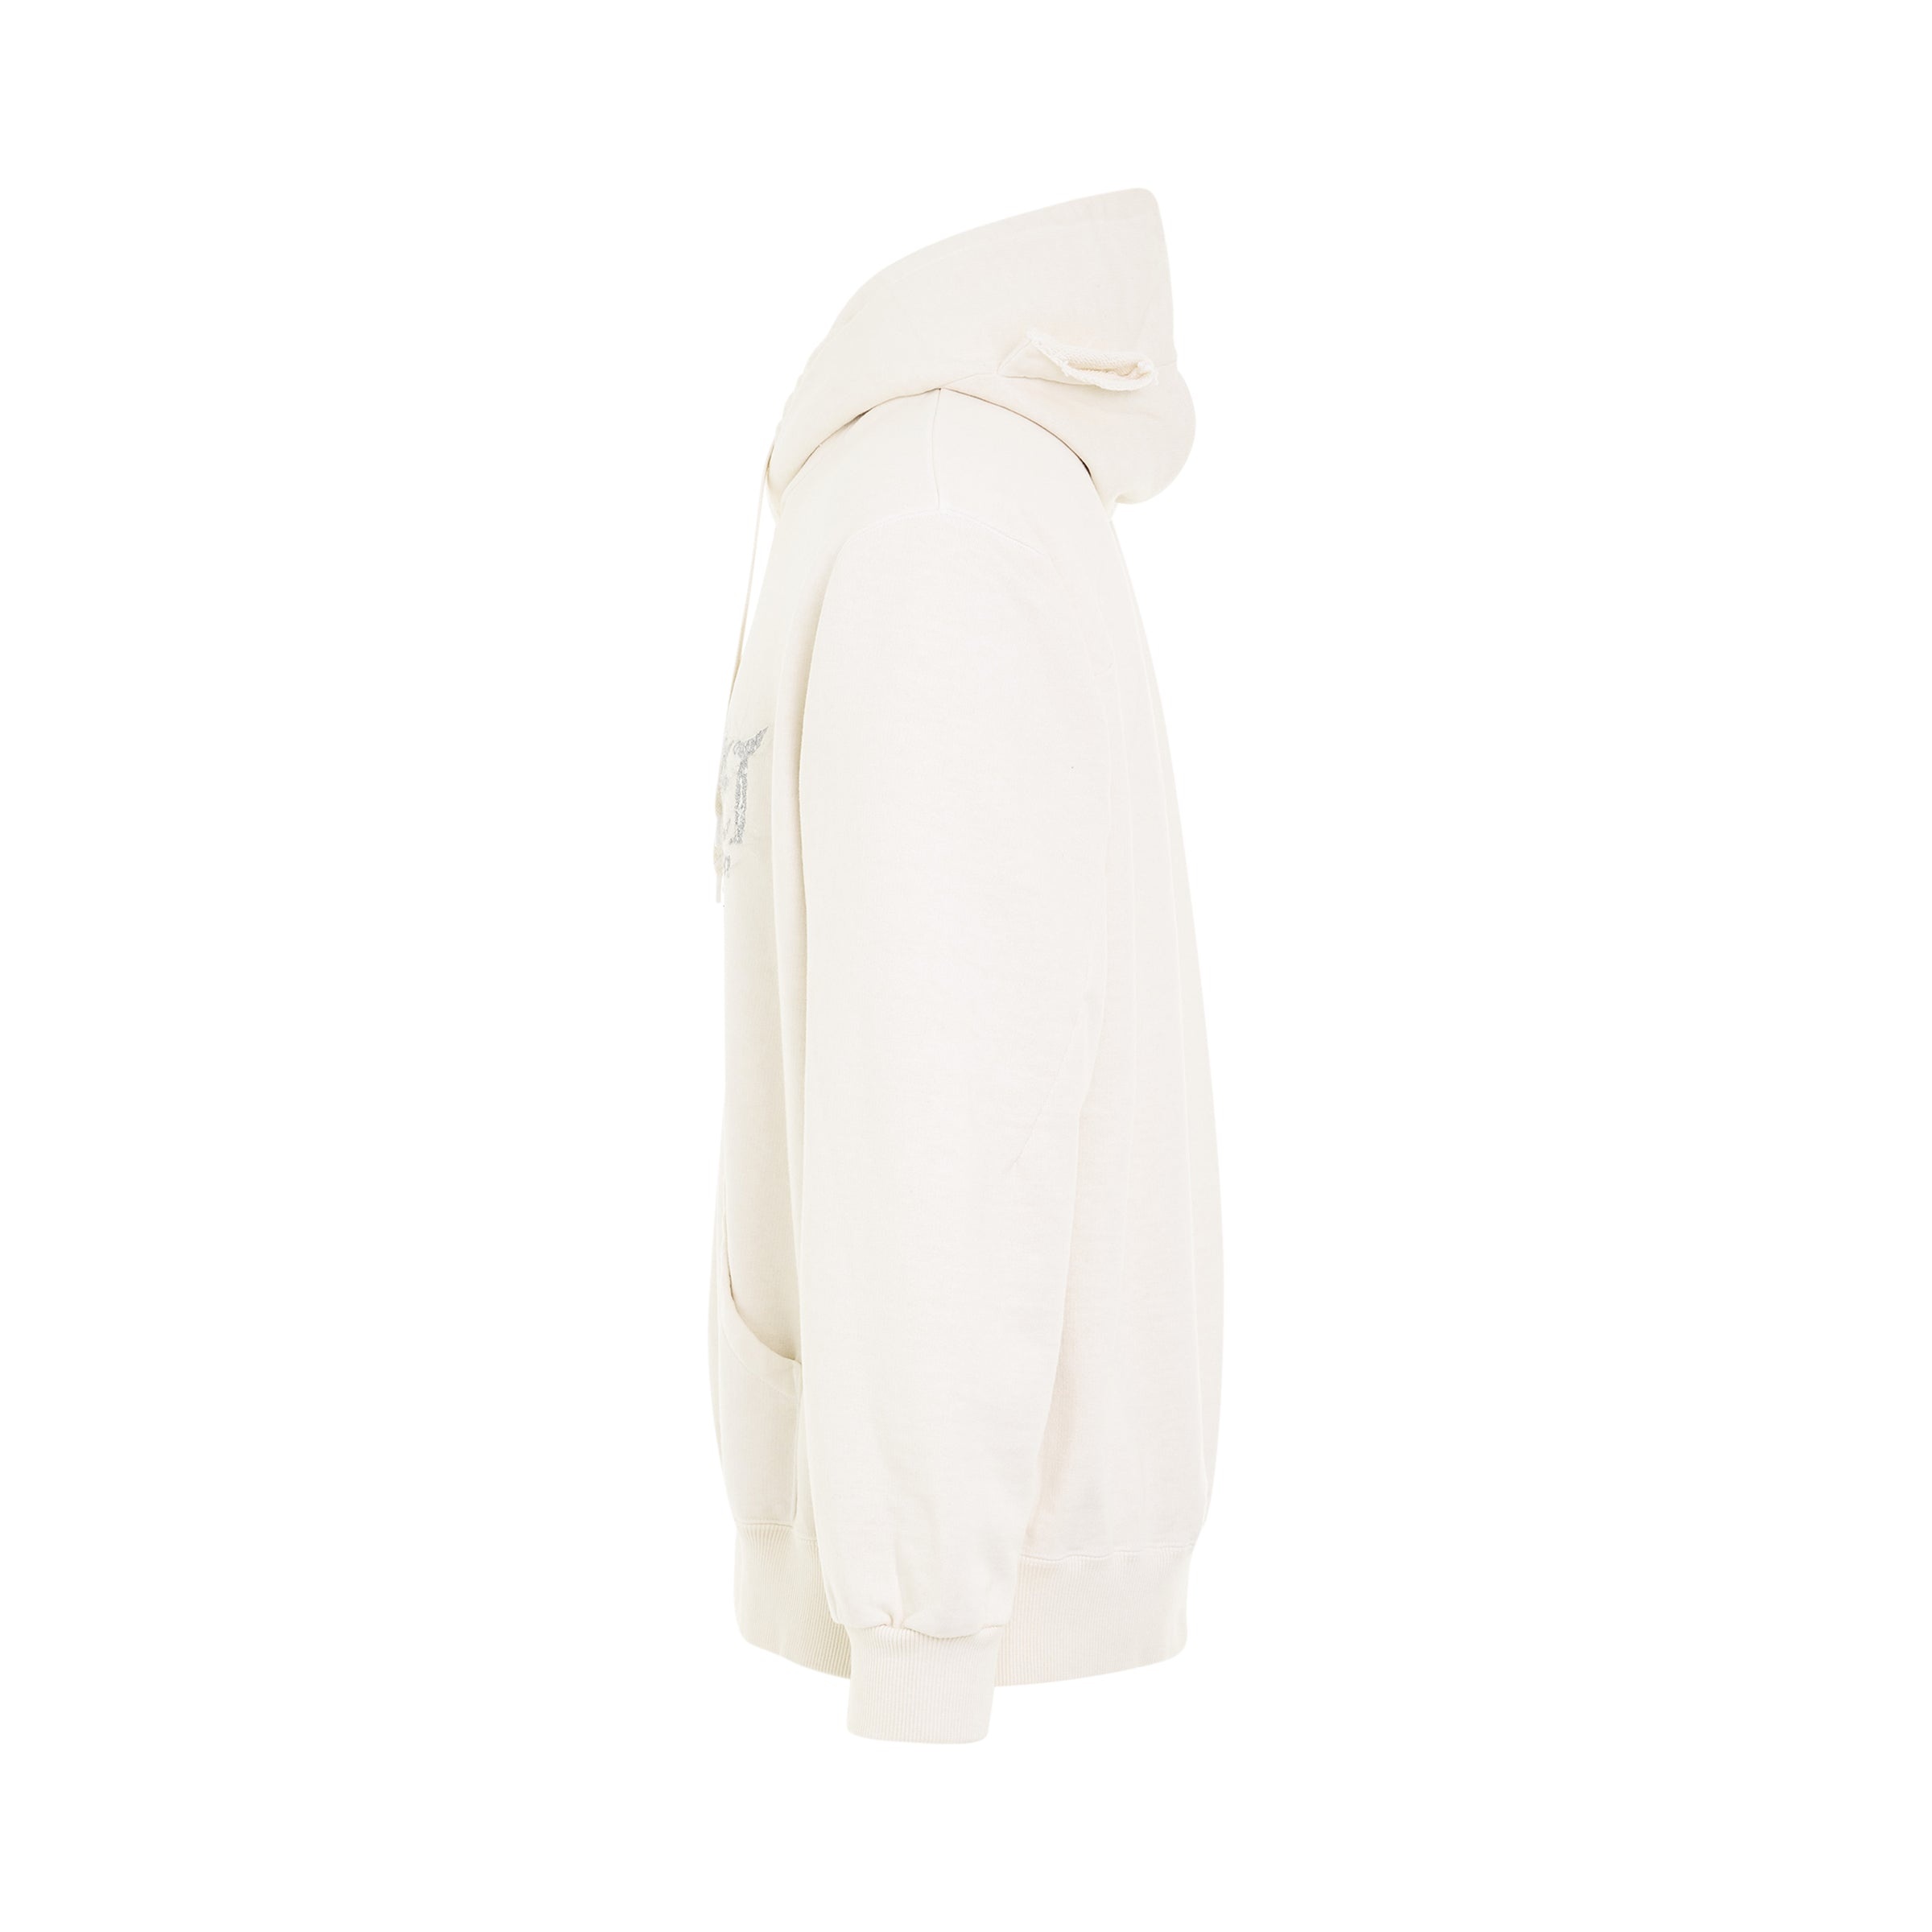 "DOUBLAND" Embroidery Hoodie in White - 3